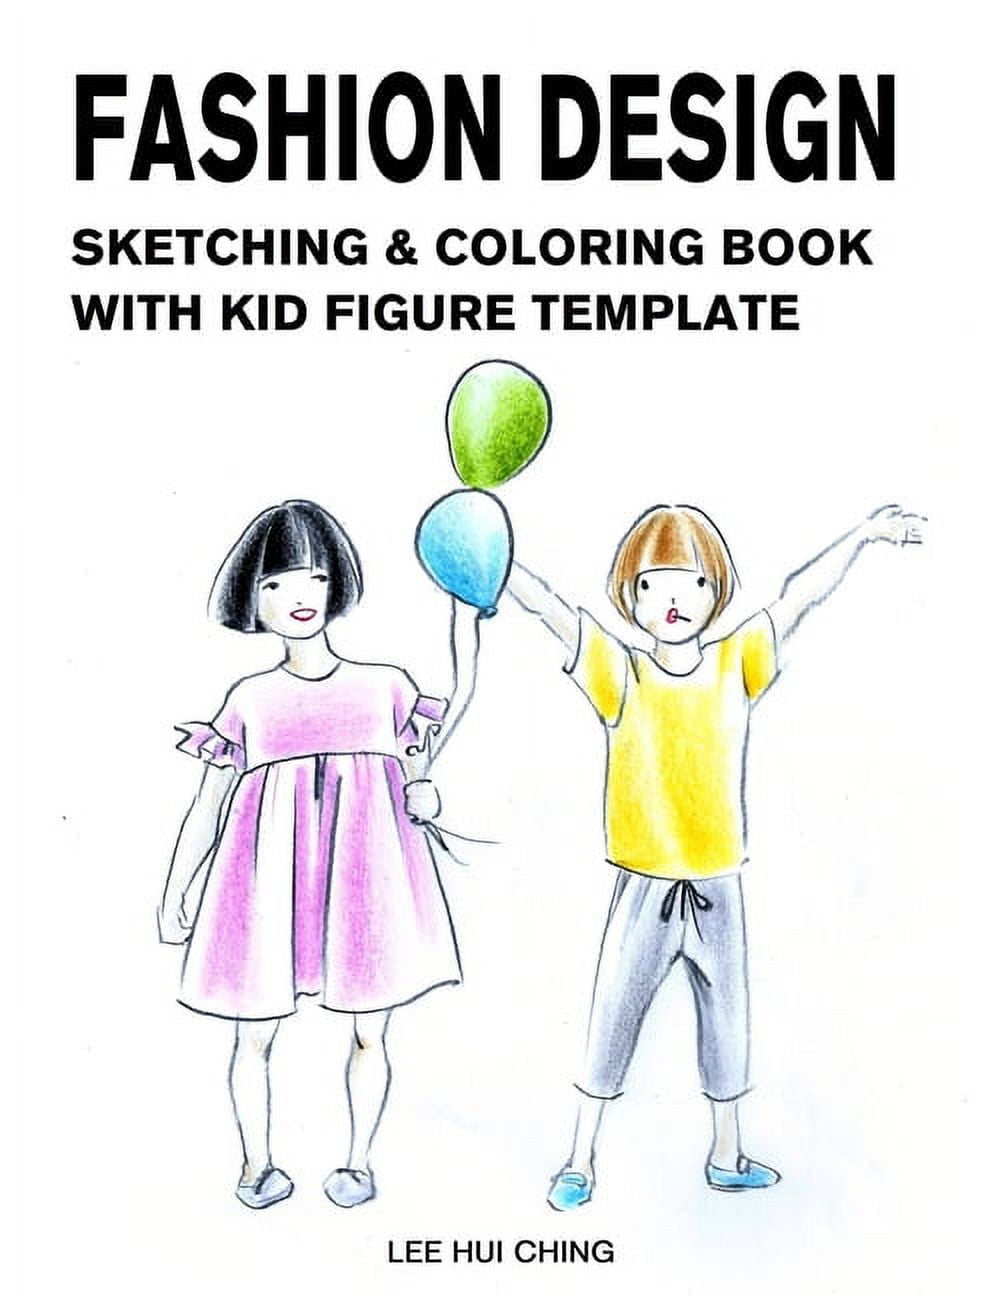 Fashion Design Sketching & Coloring Book with Kid Figure Template: Large Boys & Girls Croquis with Clothing Outline for Easily Creating Styles and Practicing Fashion Drawing [Book]